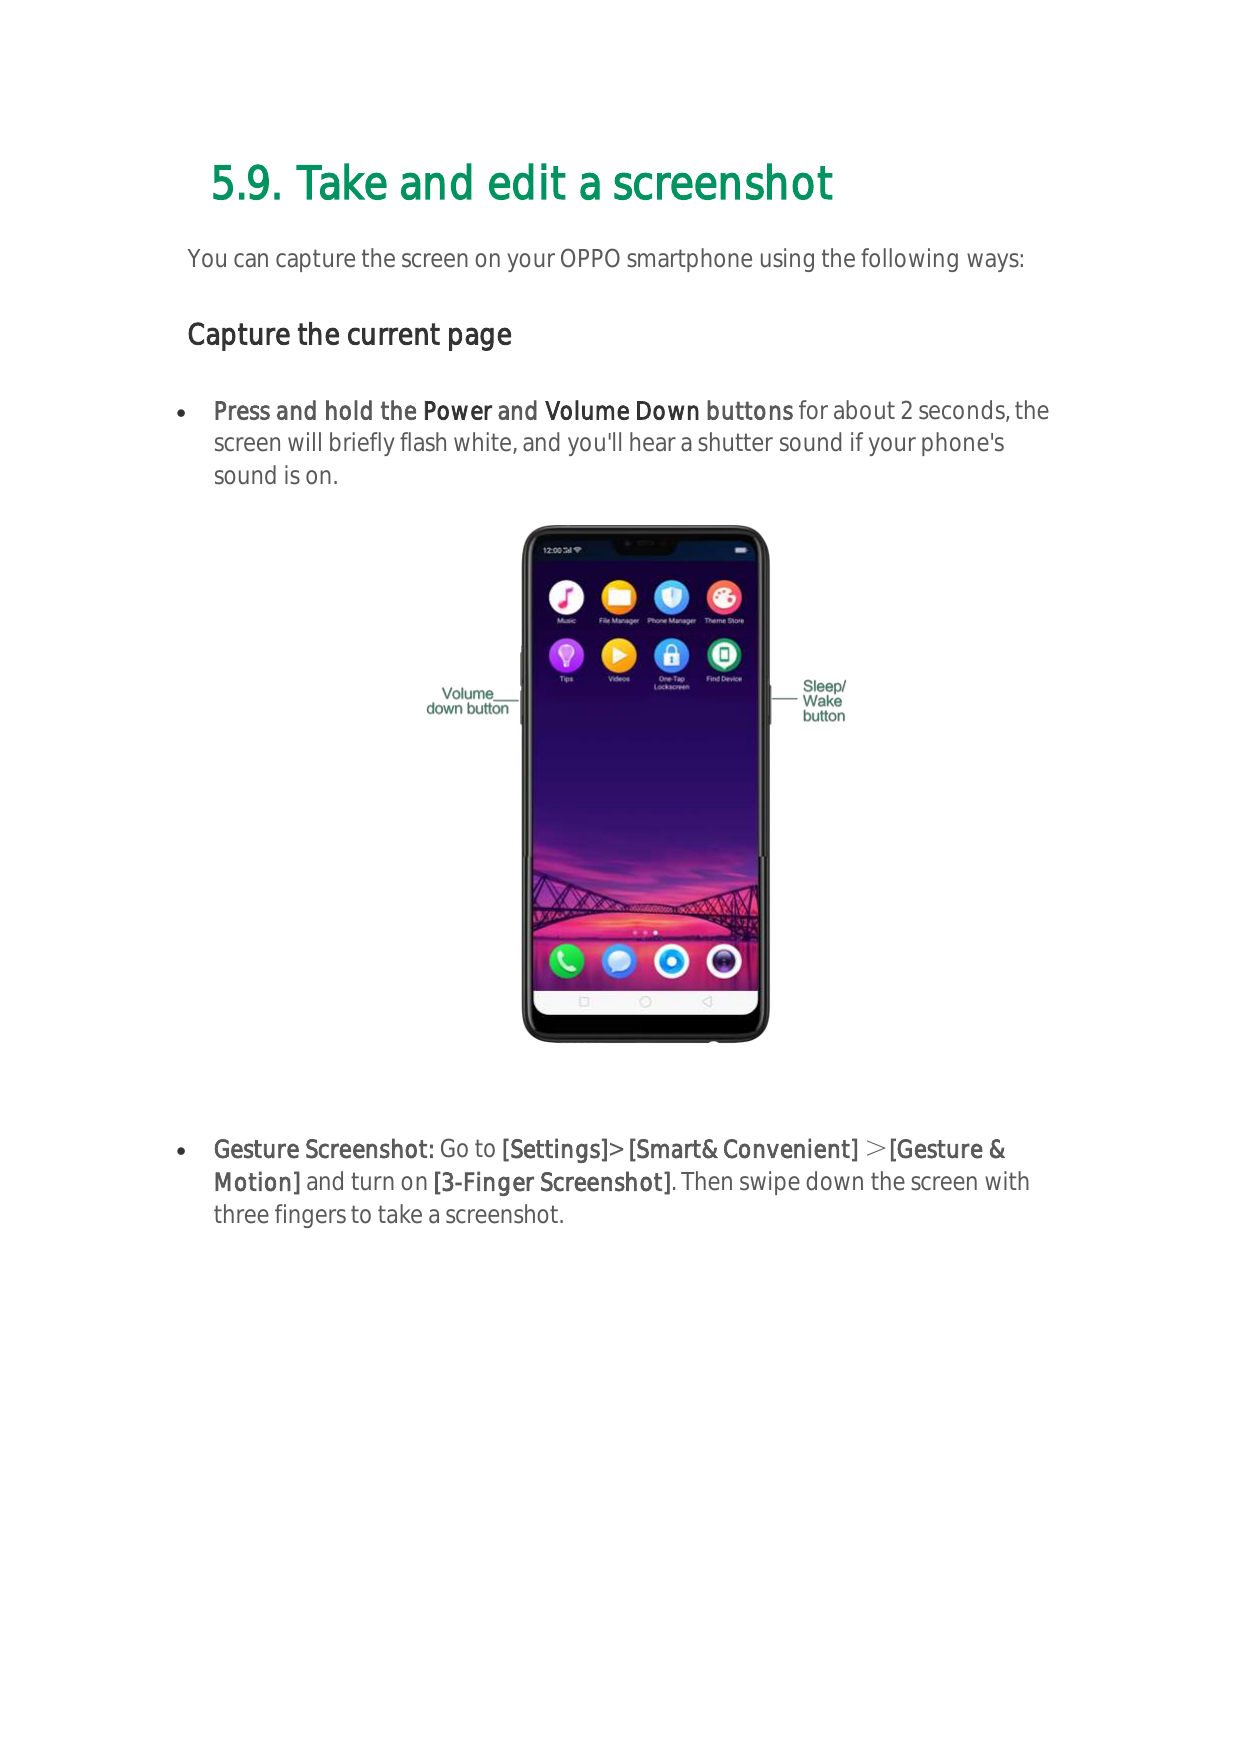 5.9. Take and edit a screenshotYou can capture the screen on your OPPO smartphone using the following ways:Capture the current p